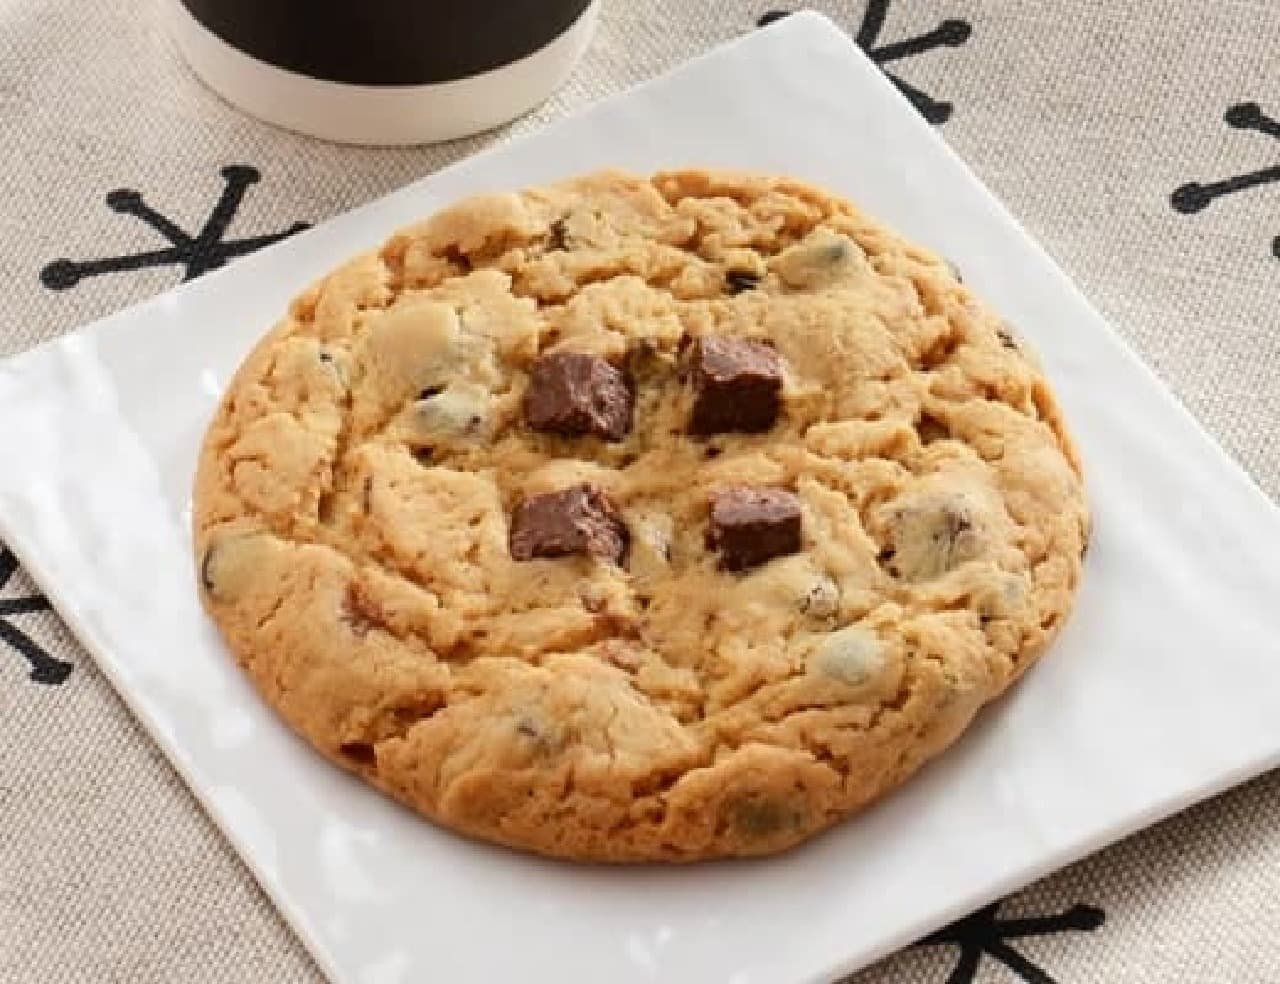 LAWSON "Double Chocolate Cookie 1pc.